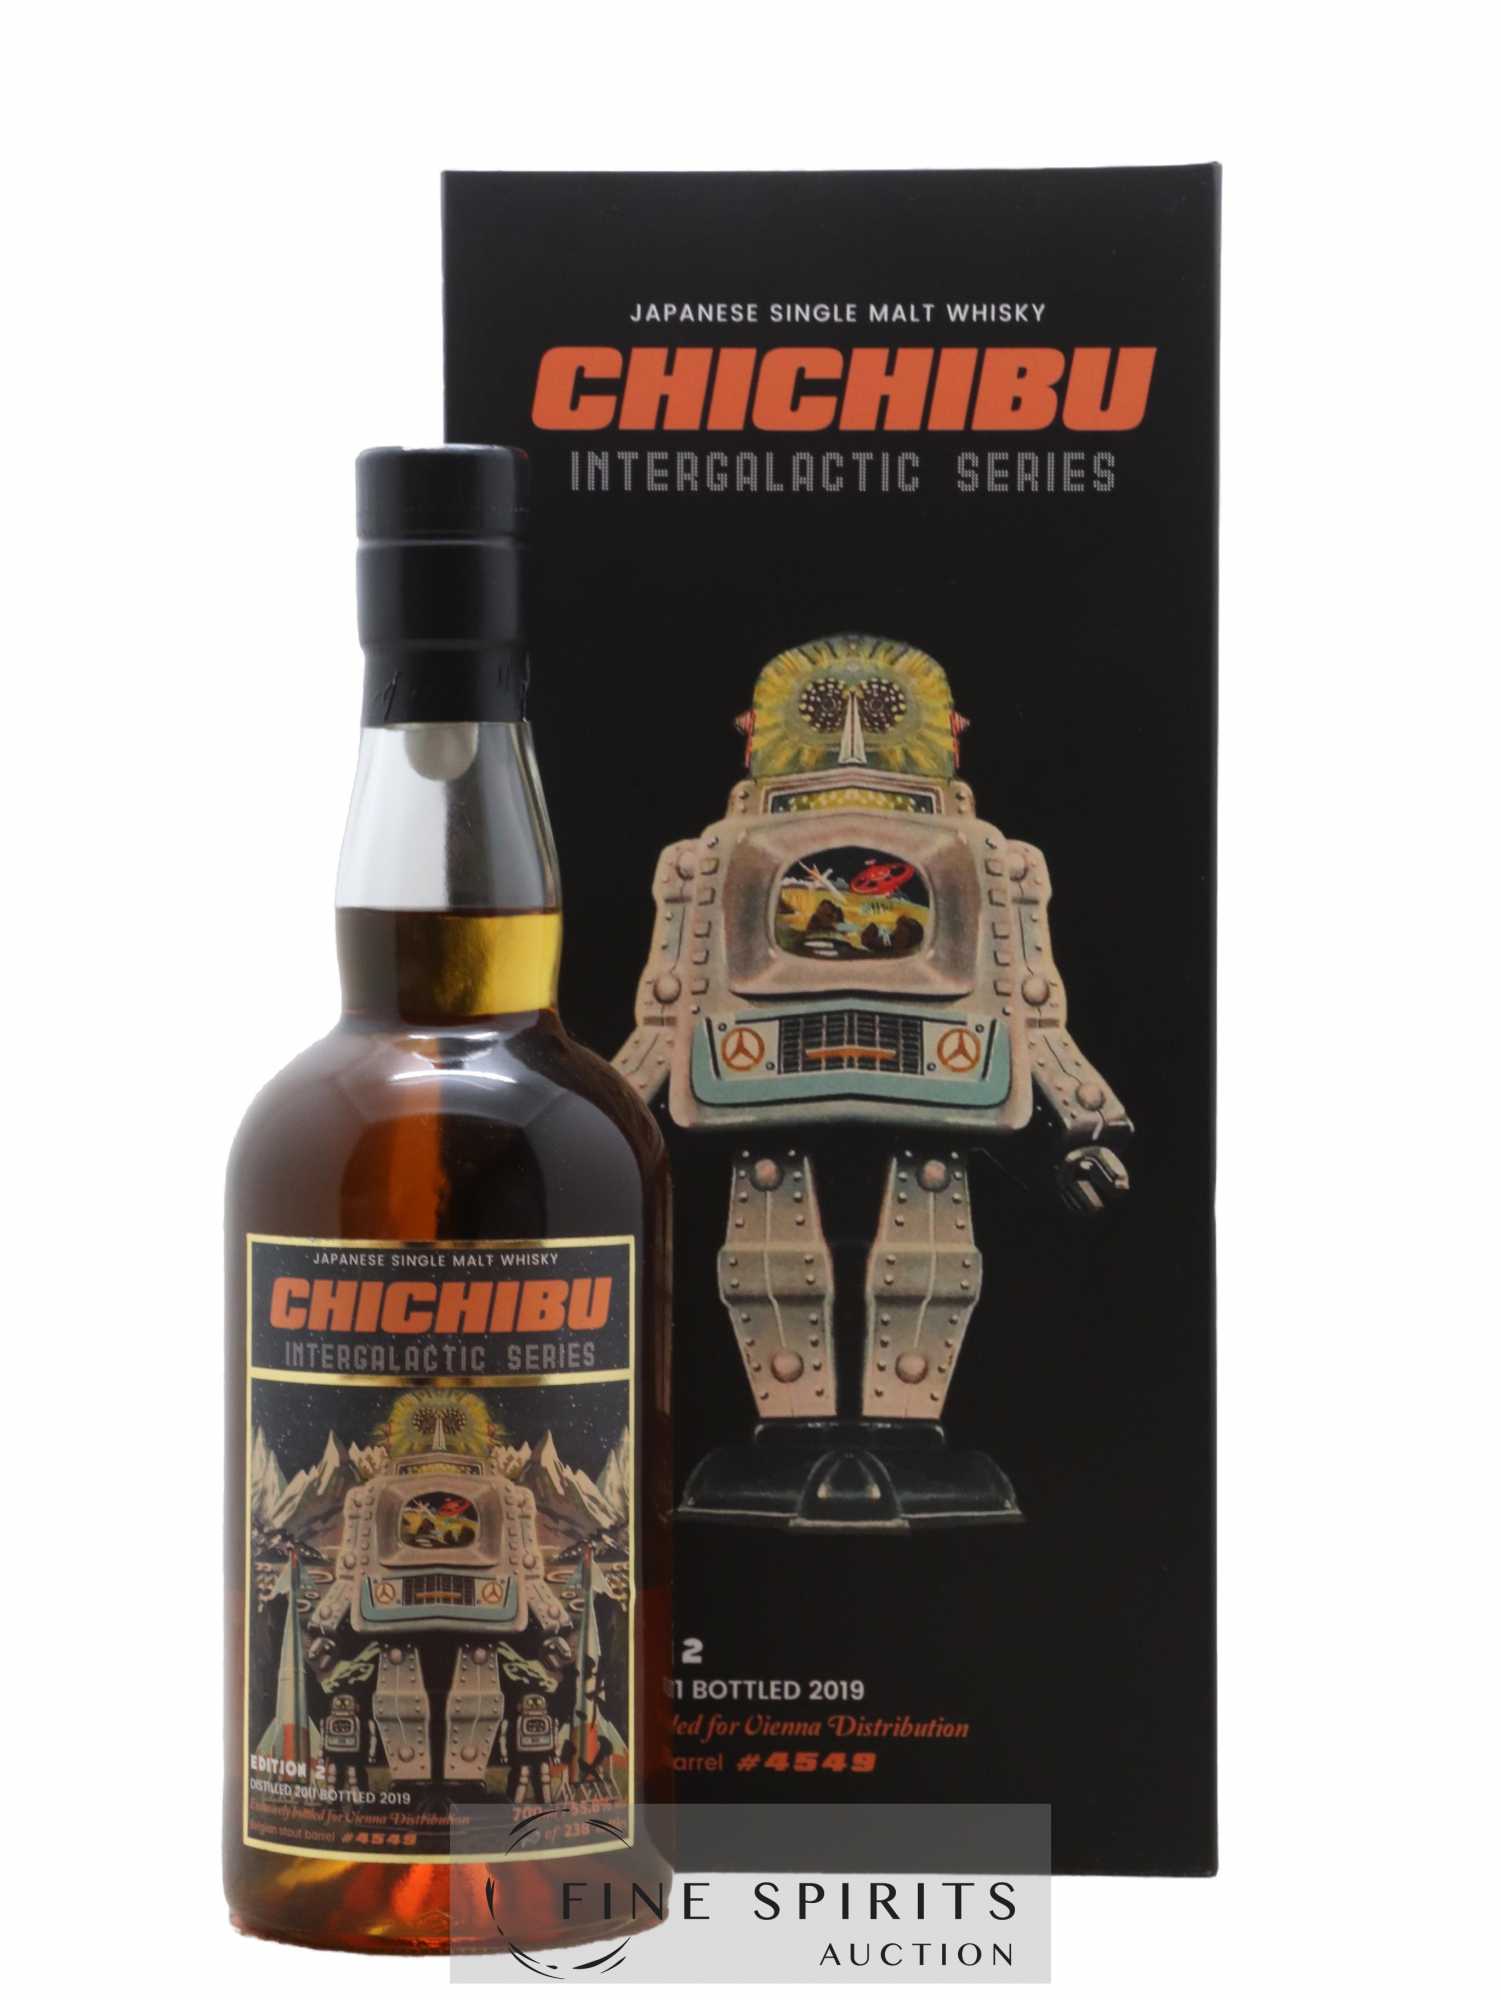 Chichibu Of. Intergalactic Series - Edition 2 Cask n°4549 - One of 238 - bottled 2019 Salud Distribution 